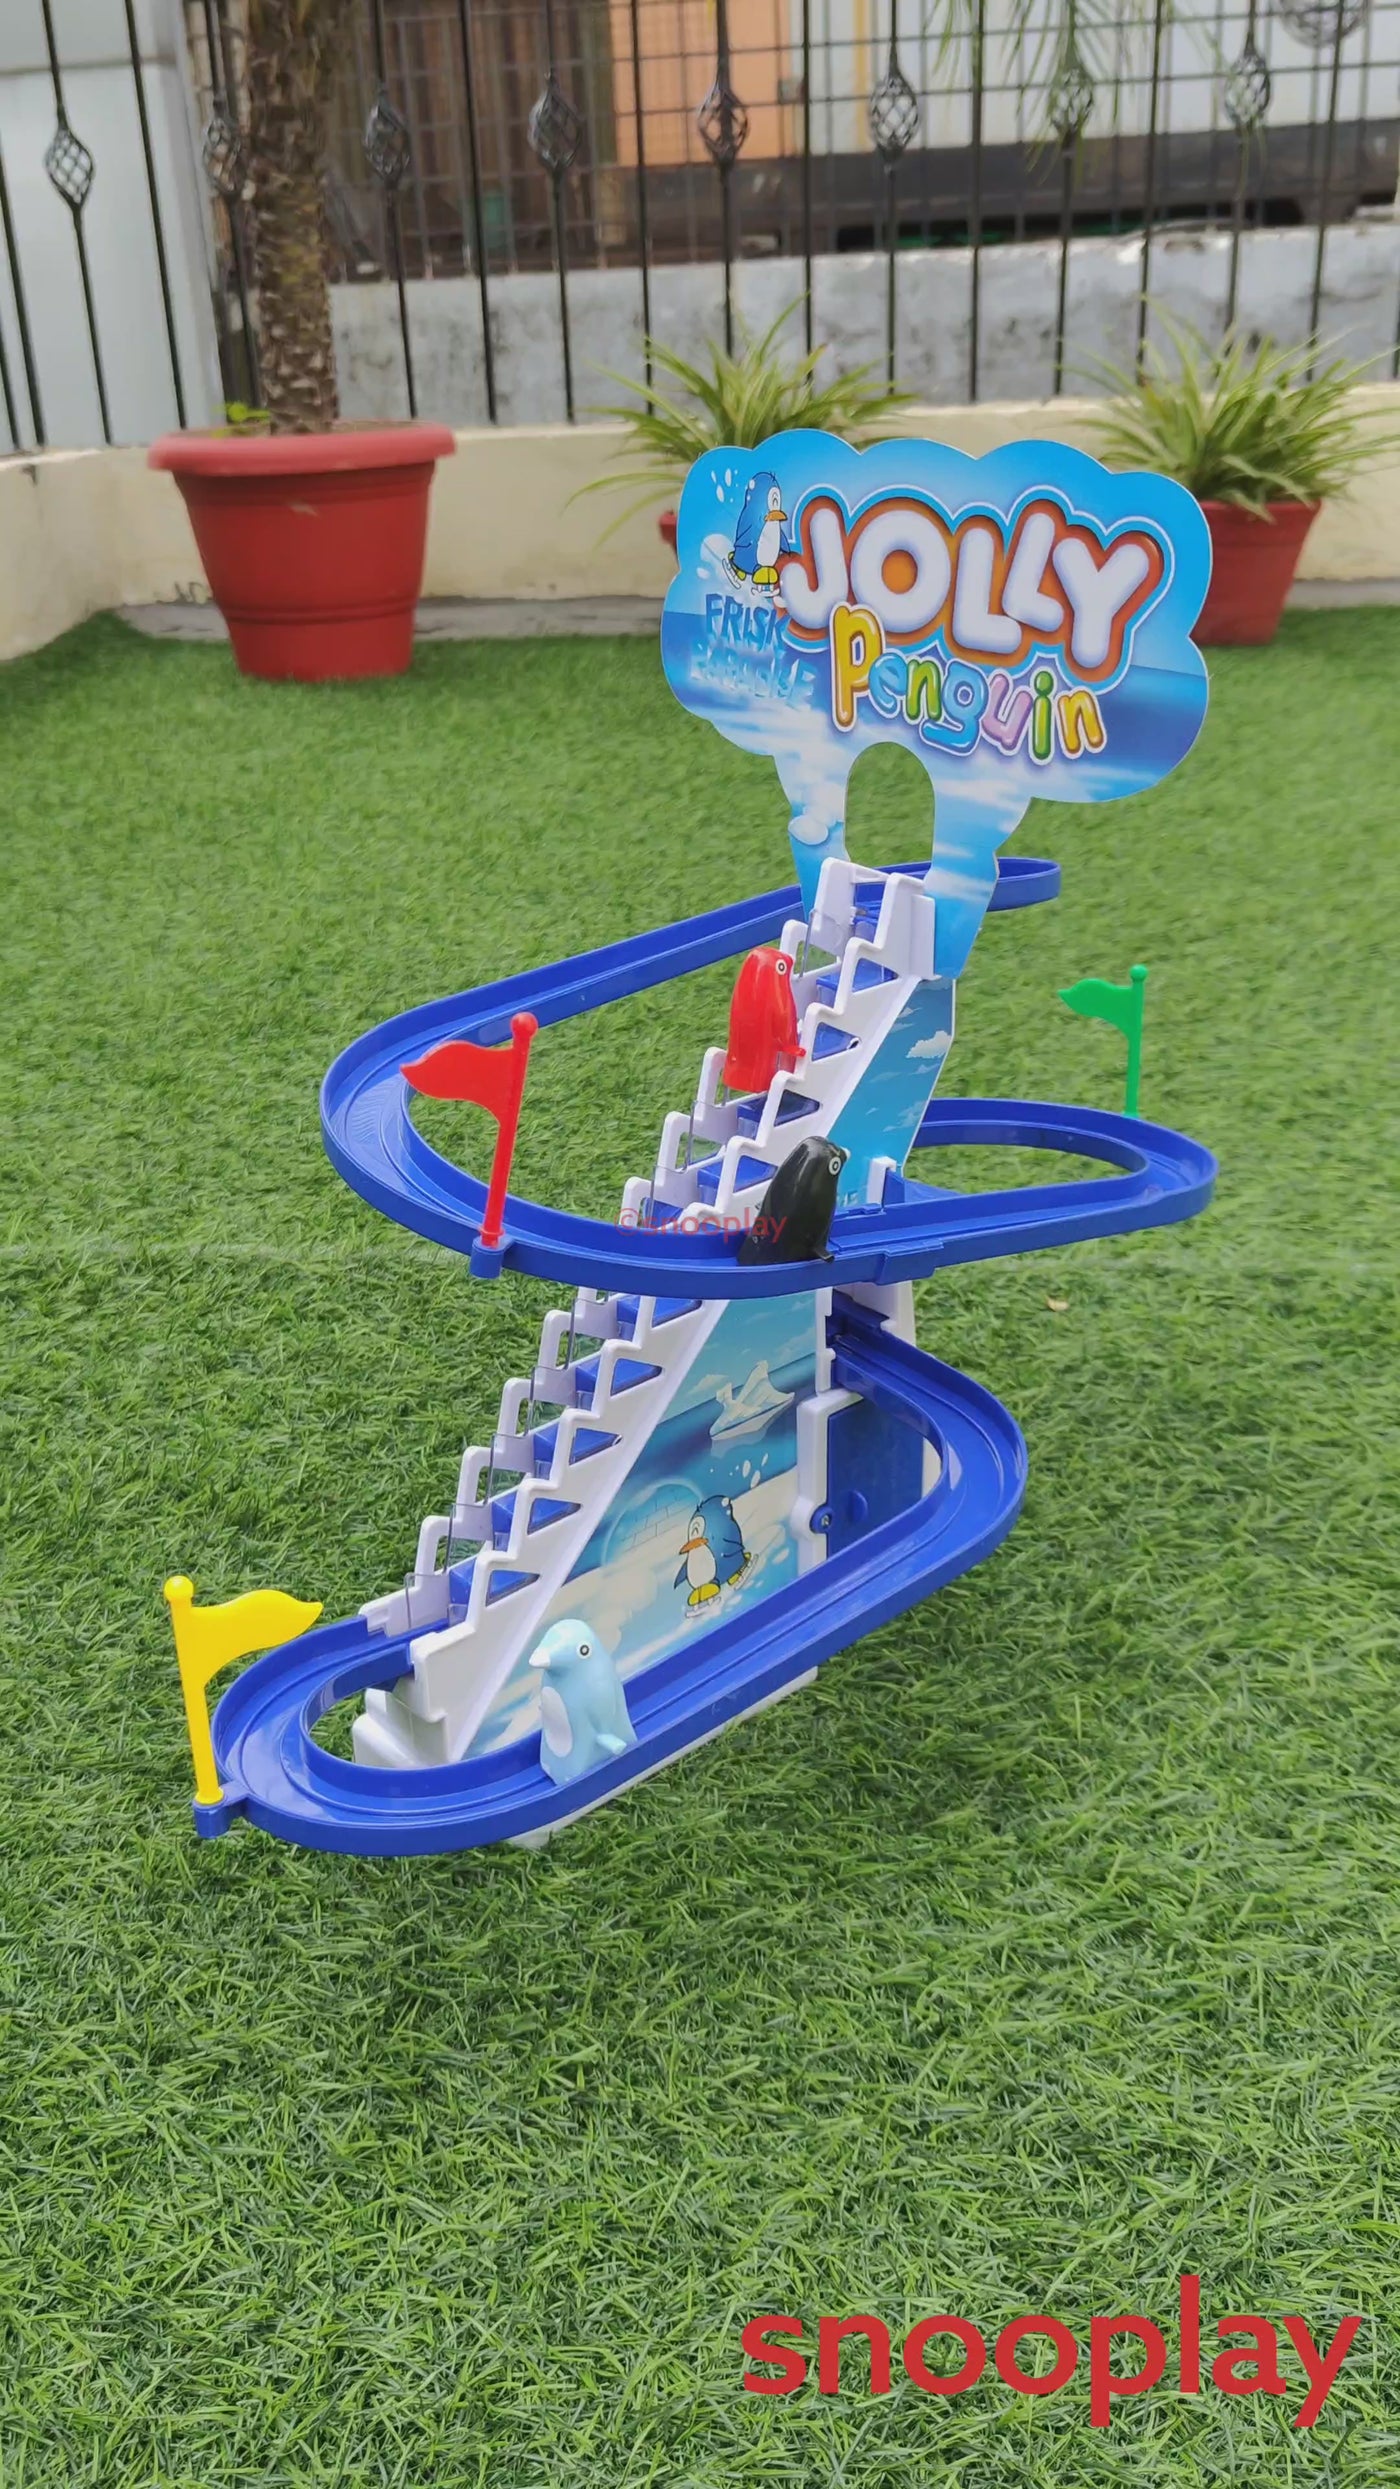 Electronic Penguin Track Set for Kids - comes with sound